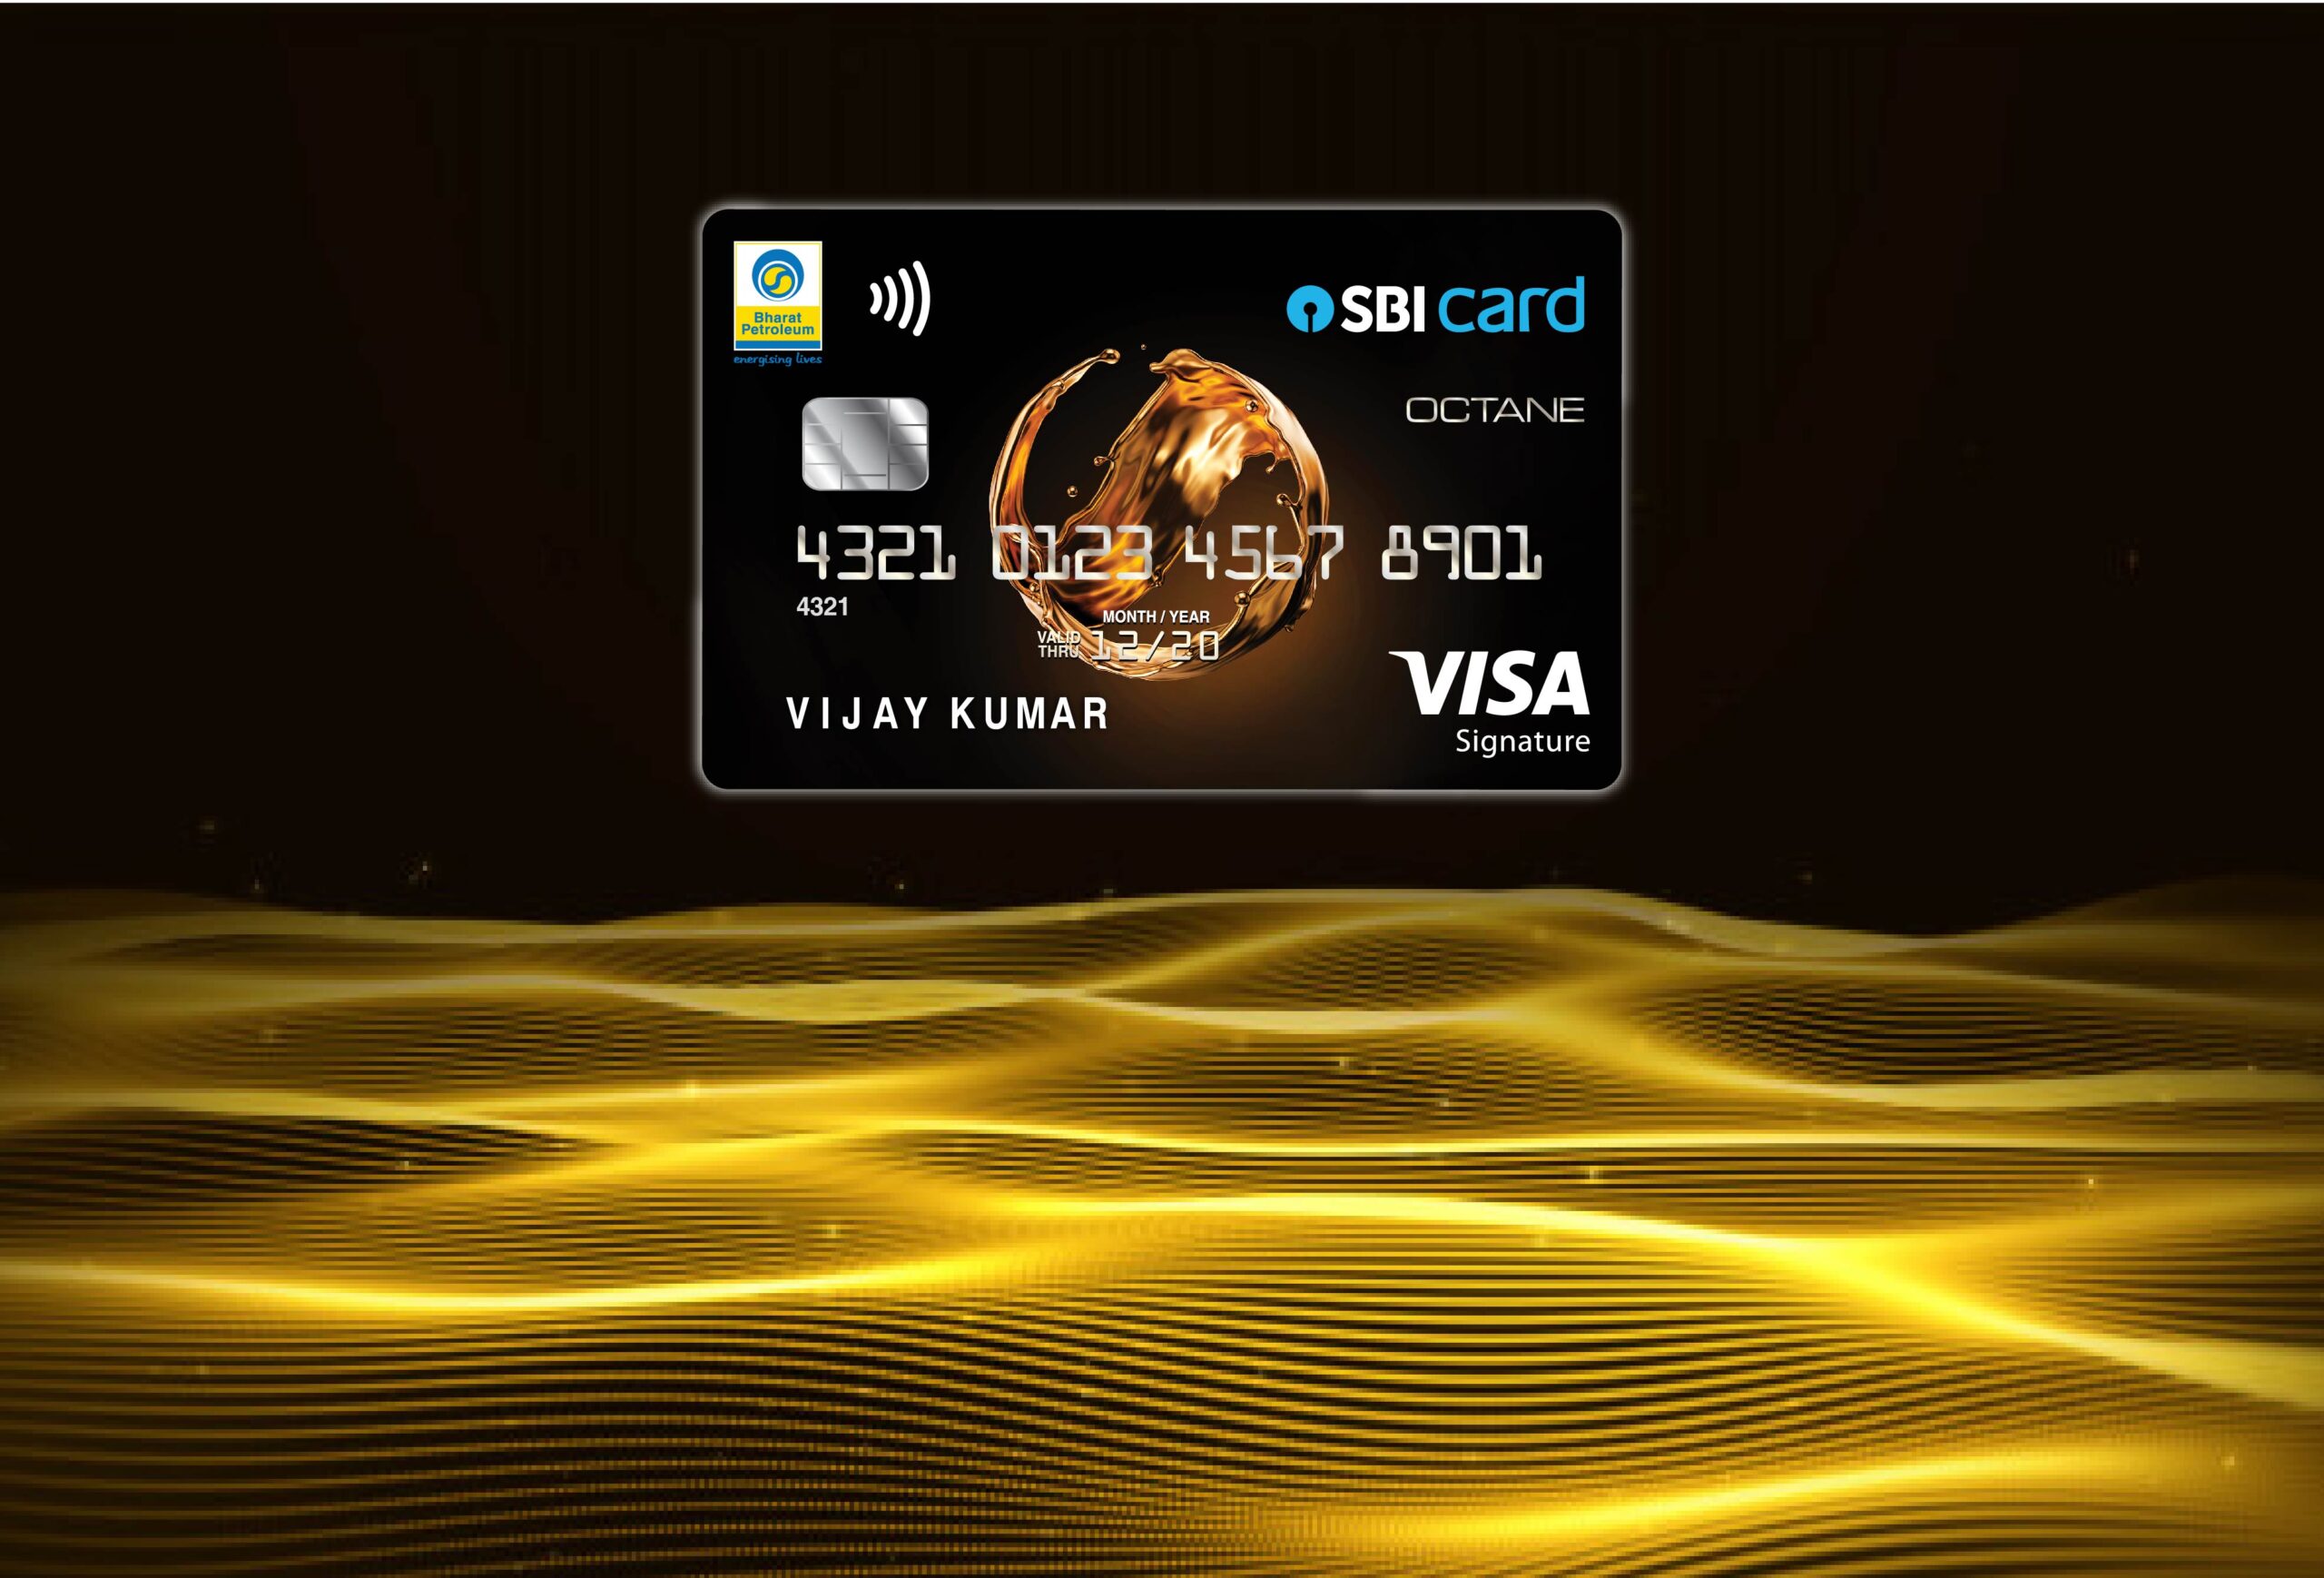 SBI Card and BPCL launch BPCL SBI Card OCTANE